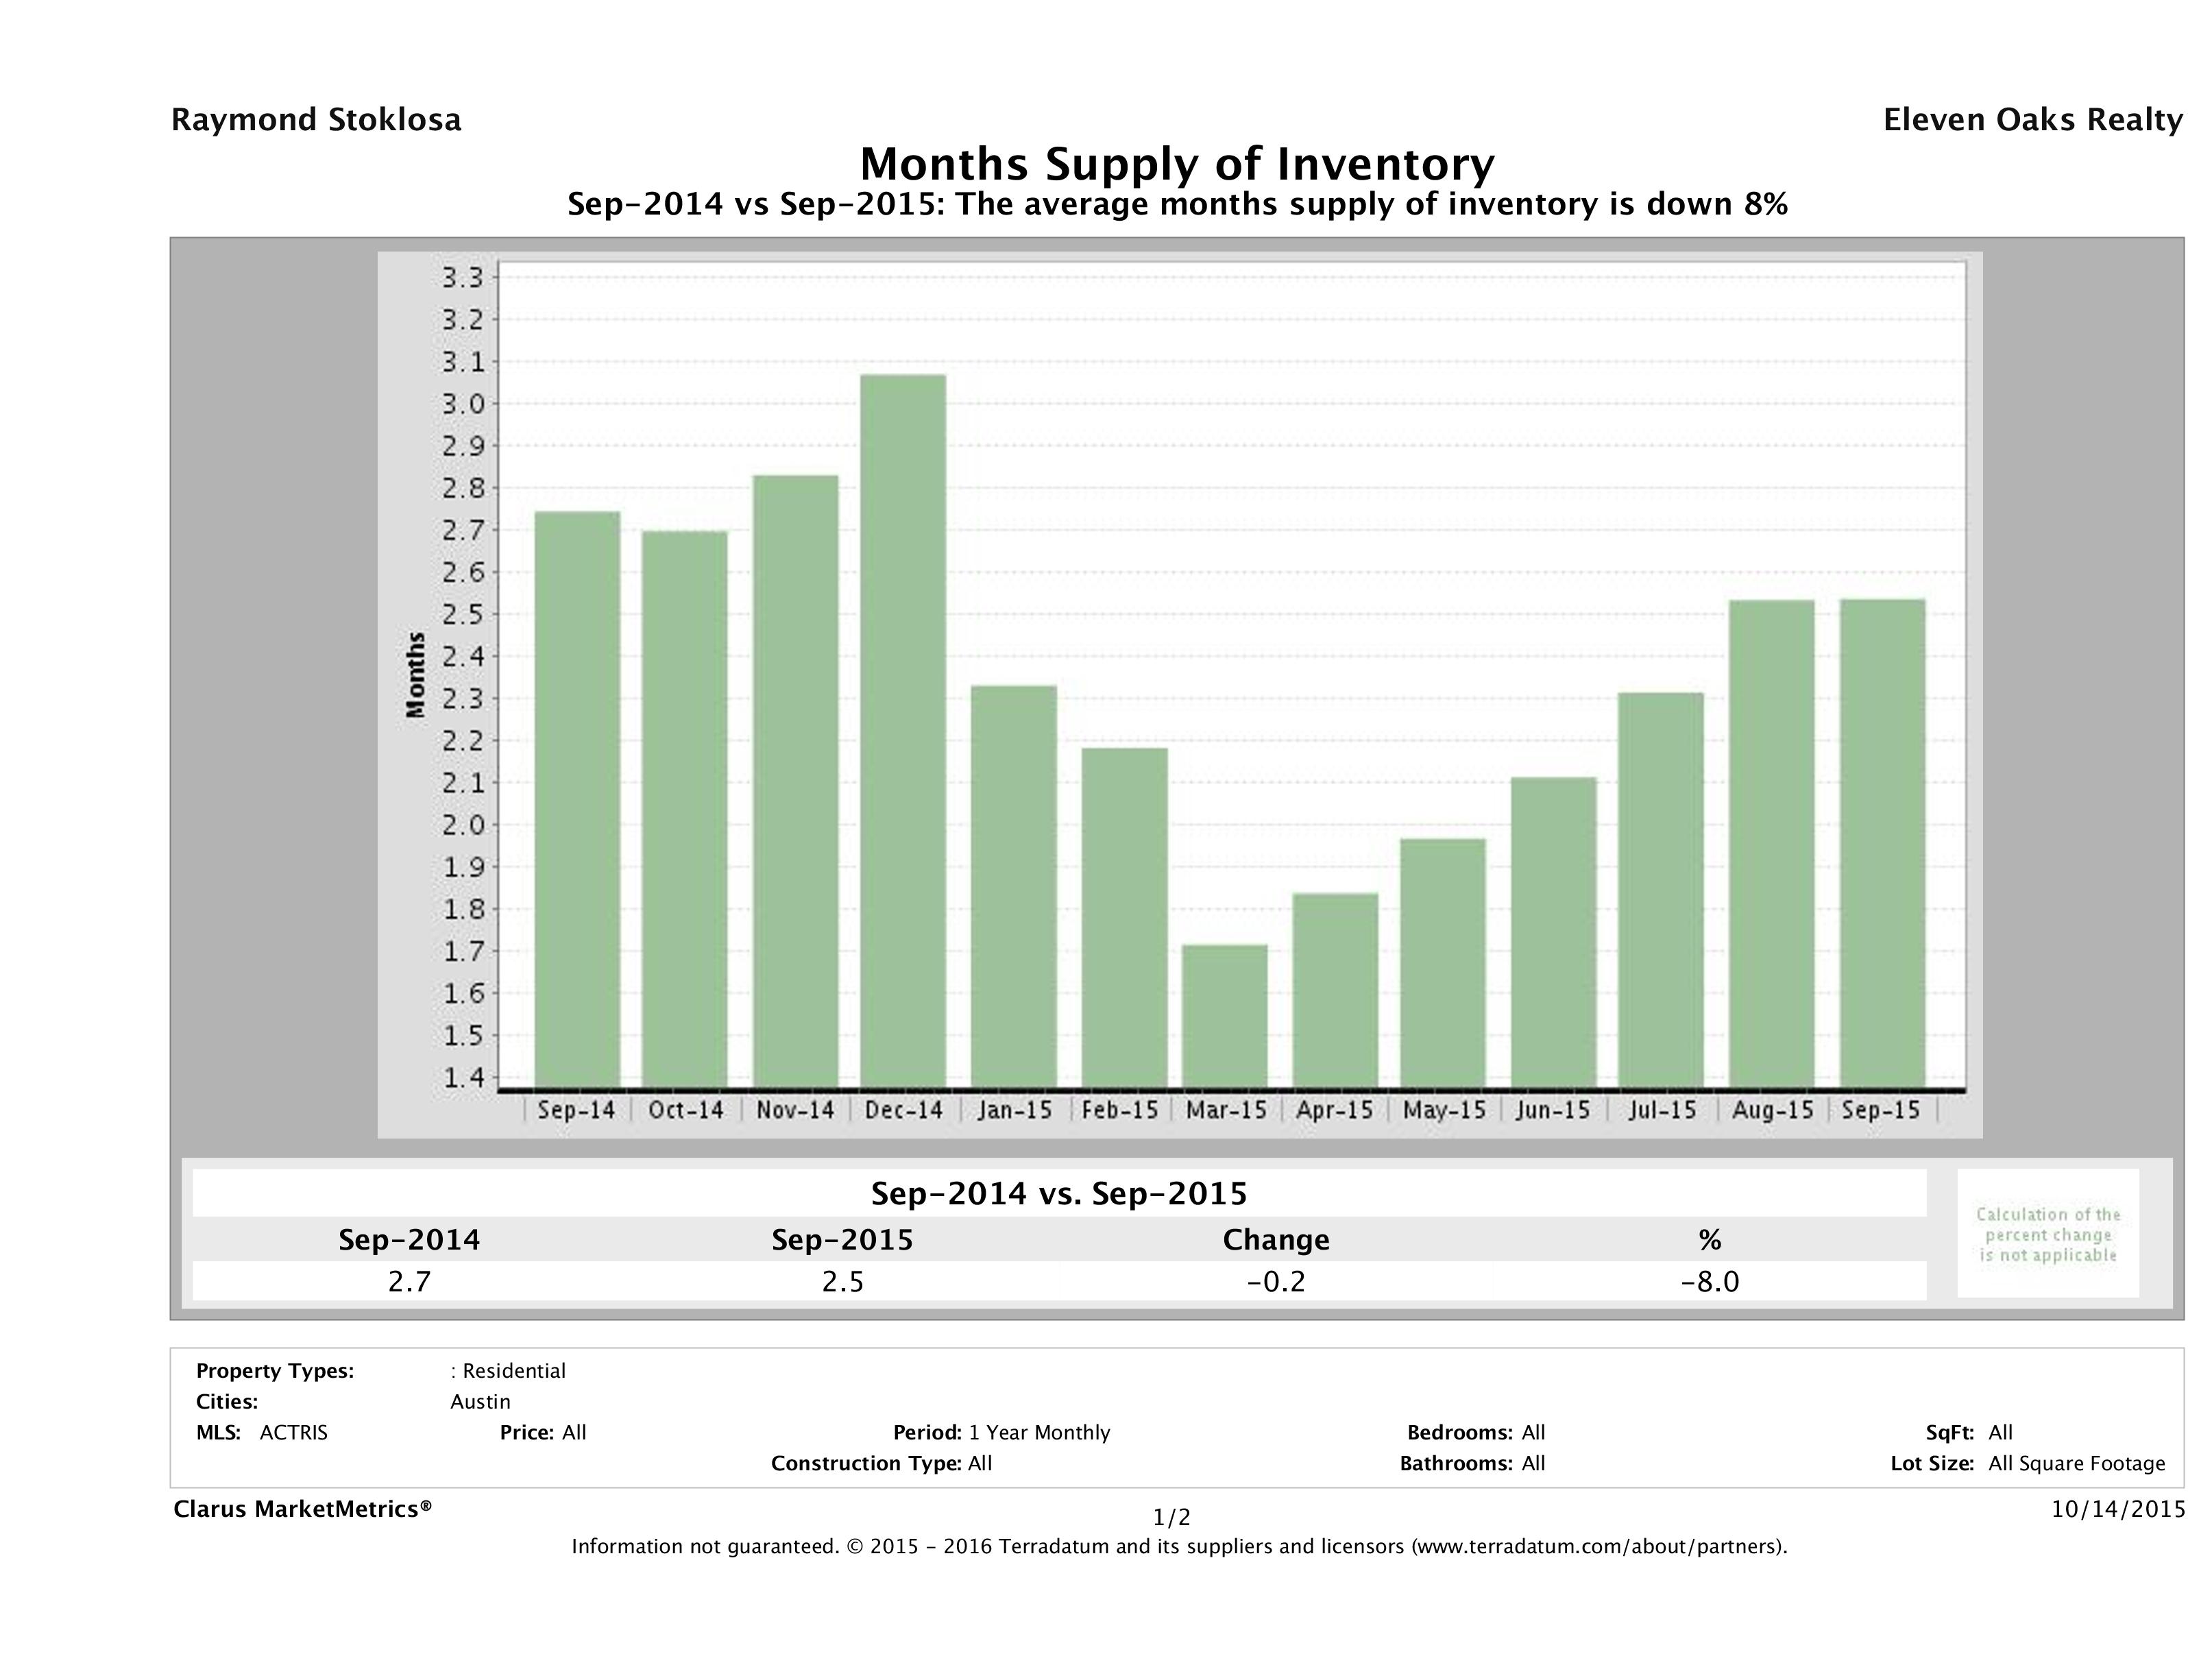 Austin single family home months inventory September 2015